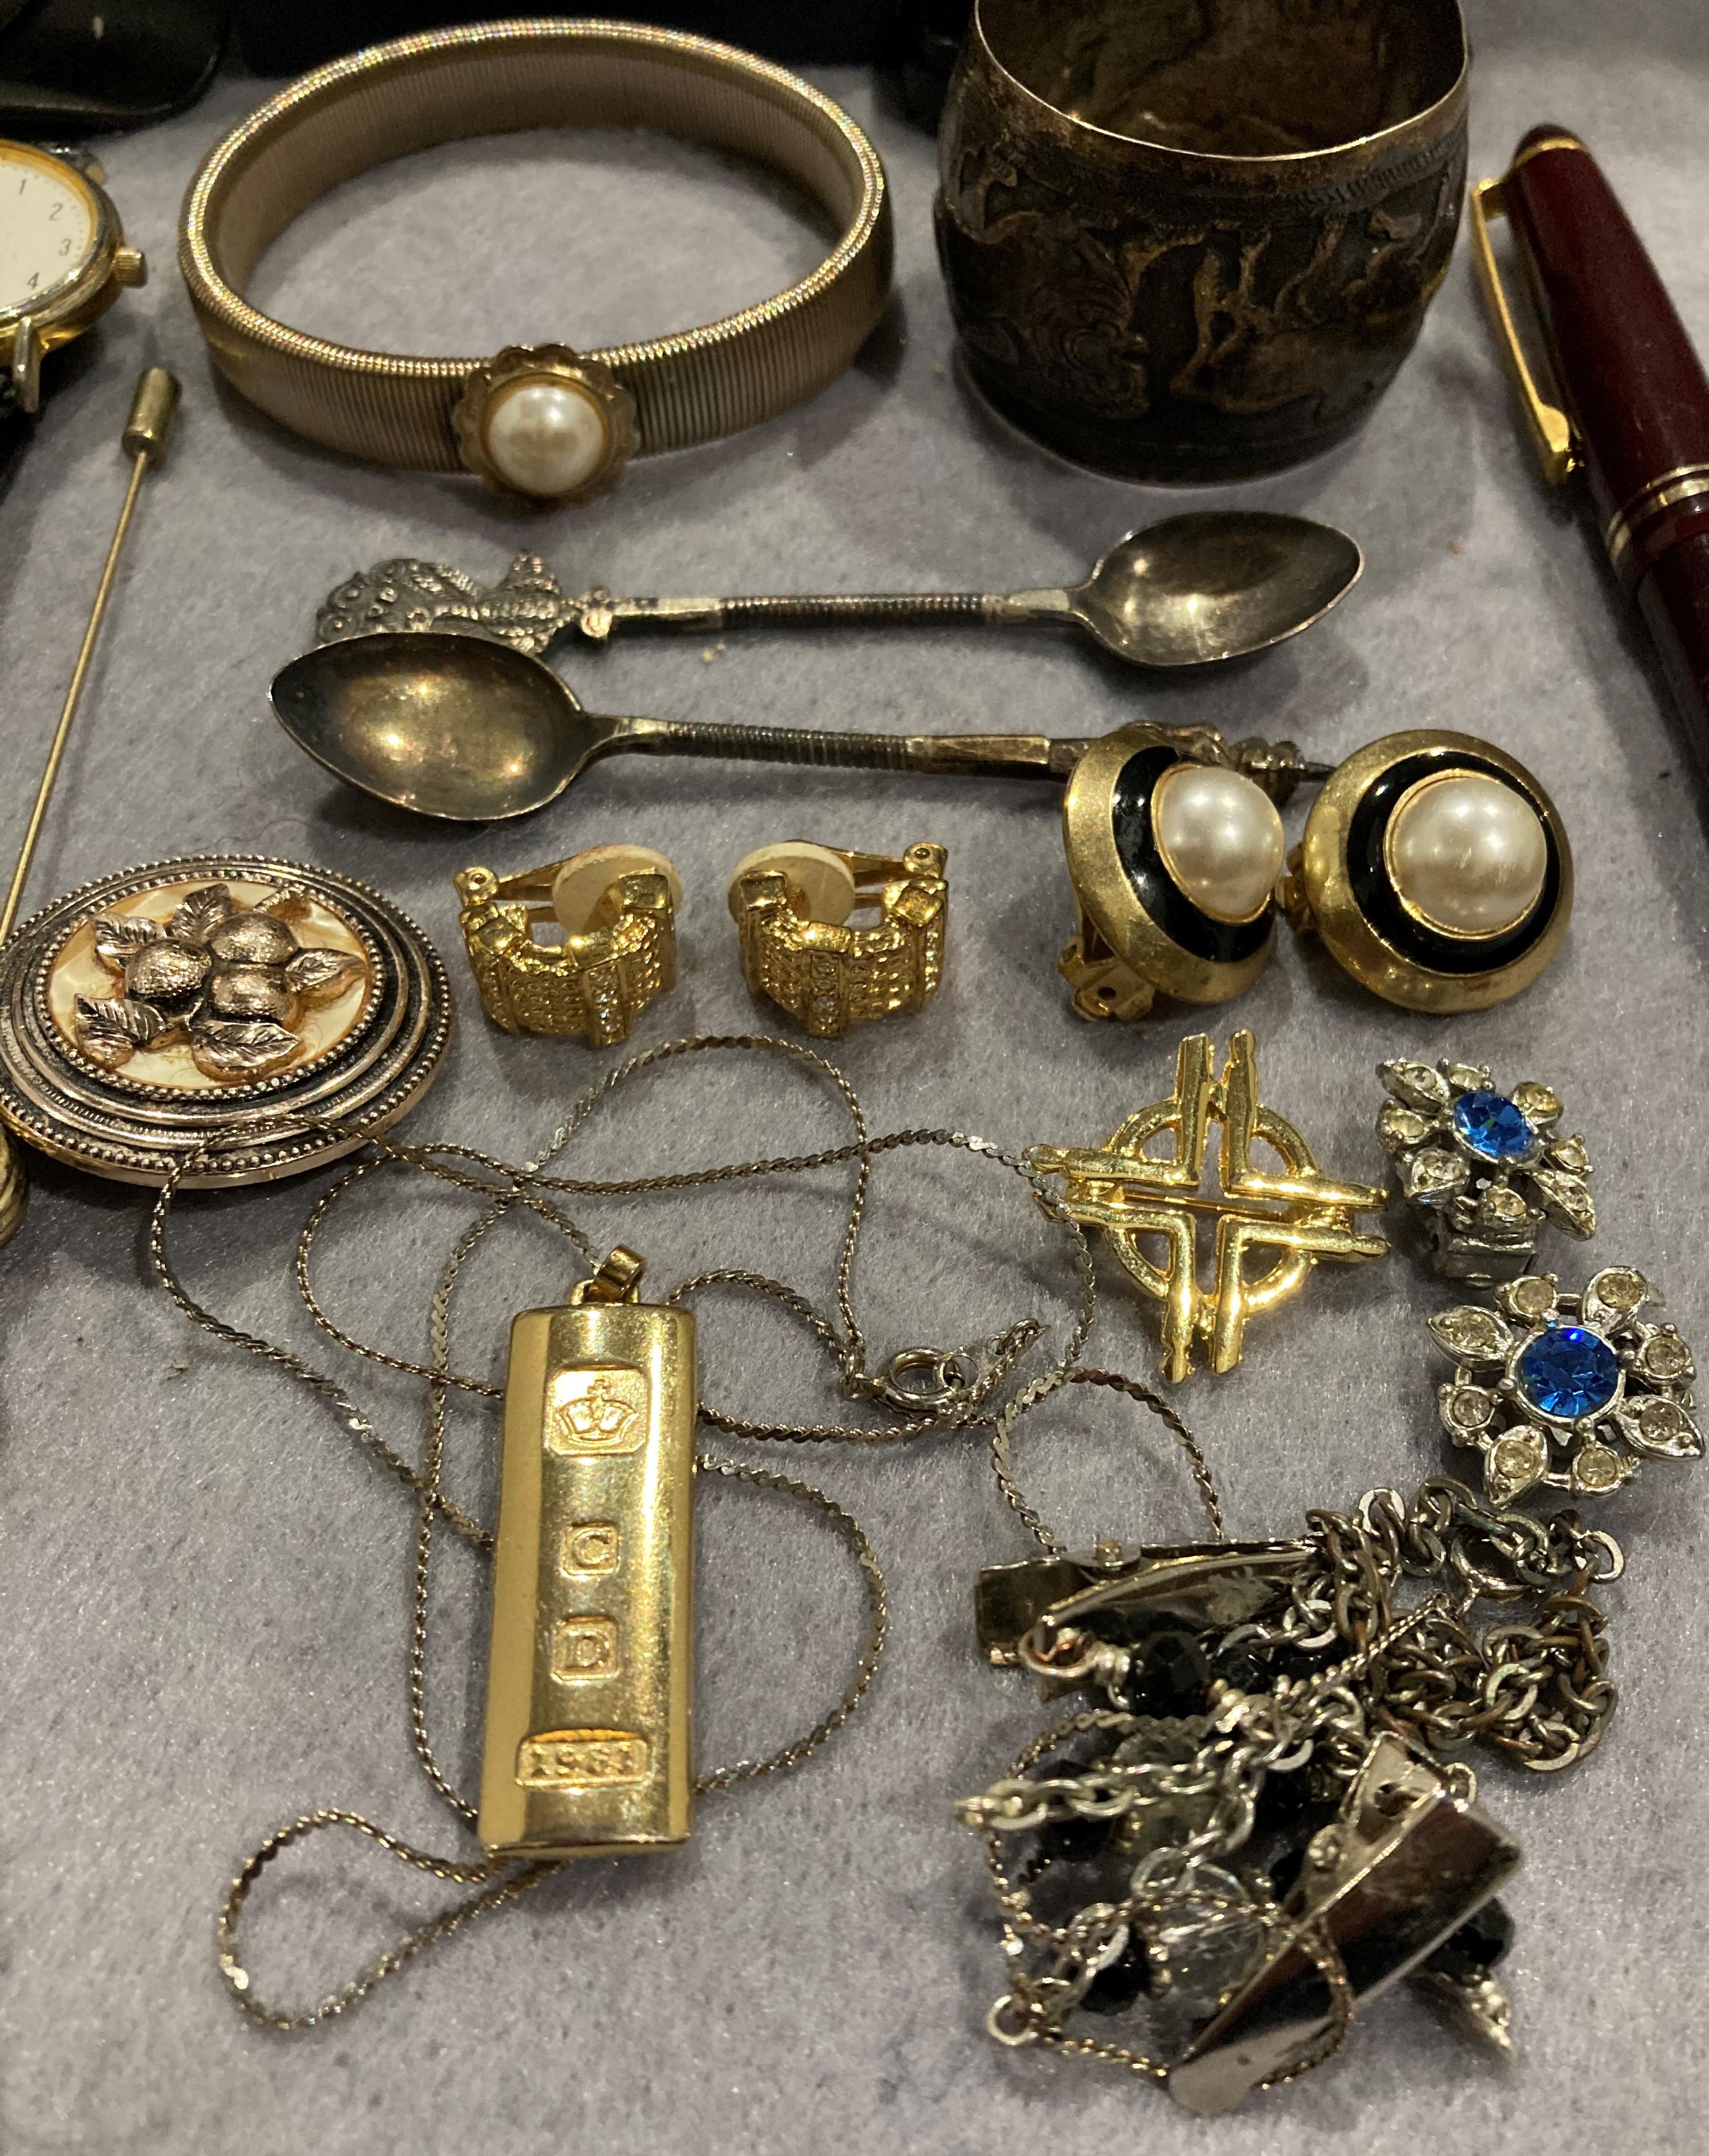 Contents to box - six brooches, gold coloured ingot with stamps, two silver teaspoons, earrings, - Image 2 of 3